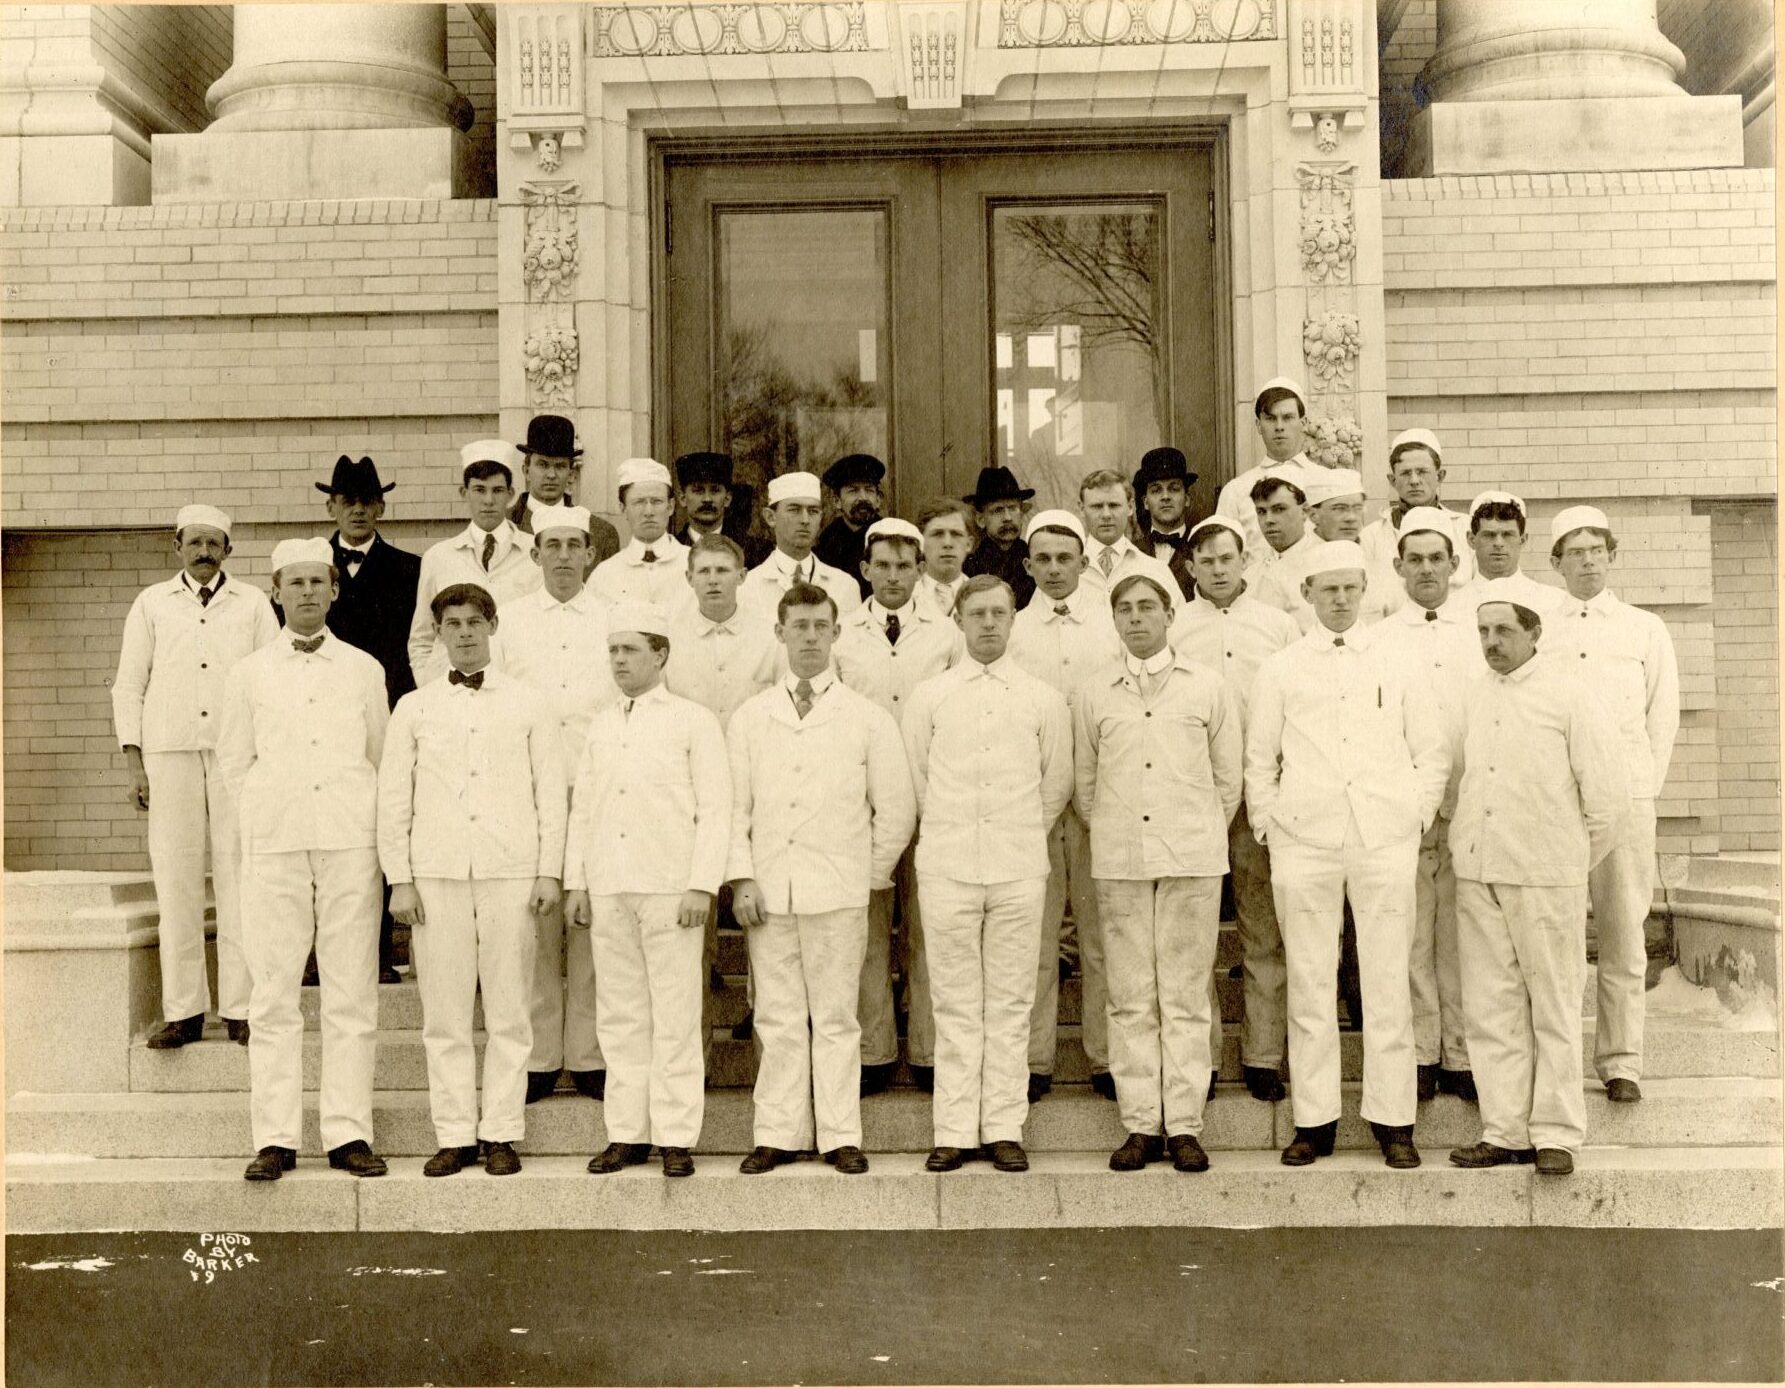 Dairy school students in white uniforms stand in front of the Morrill Hall main entrance.